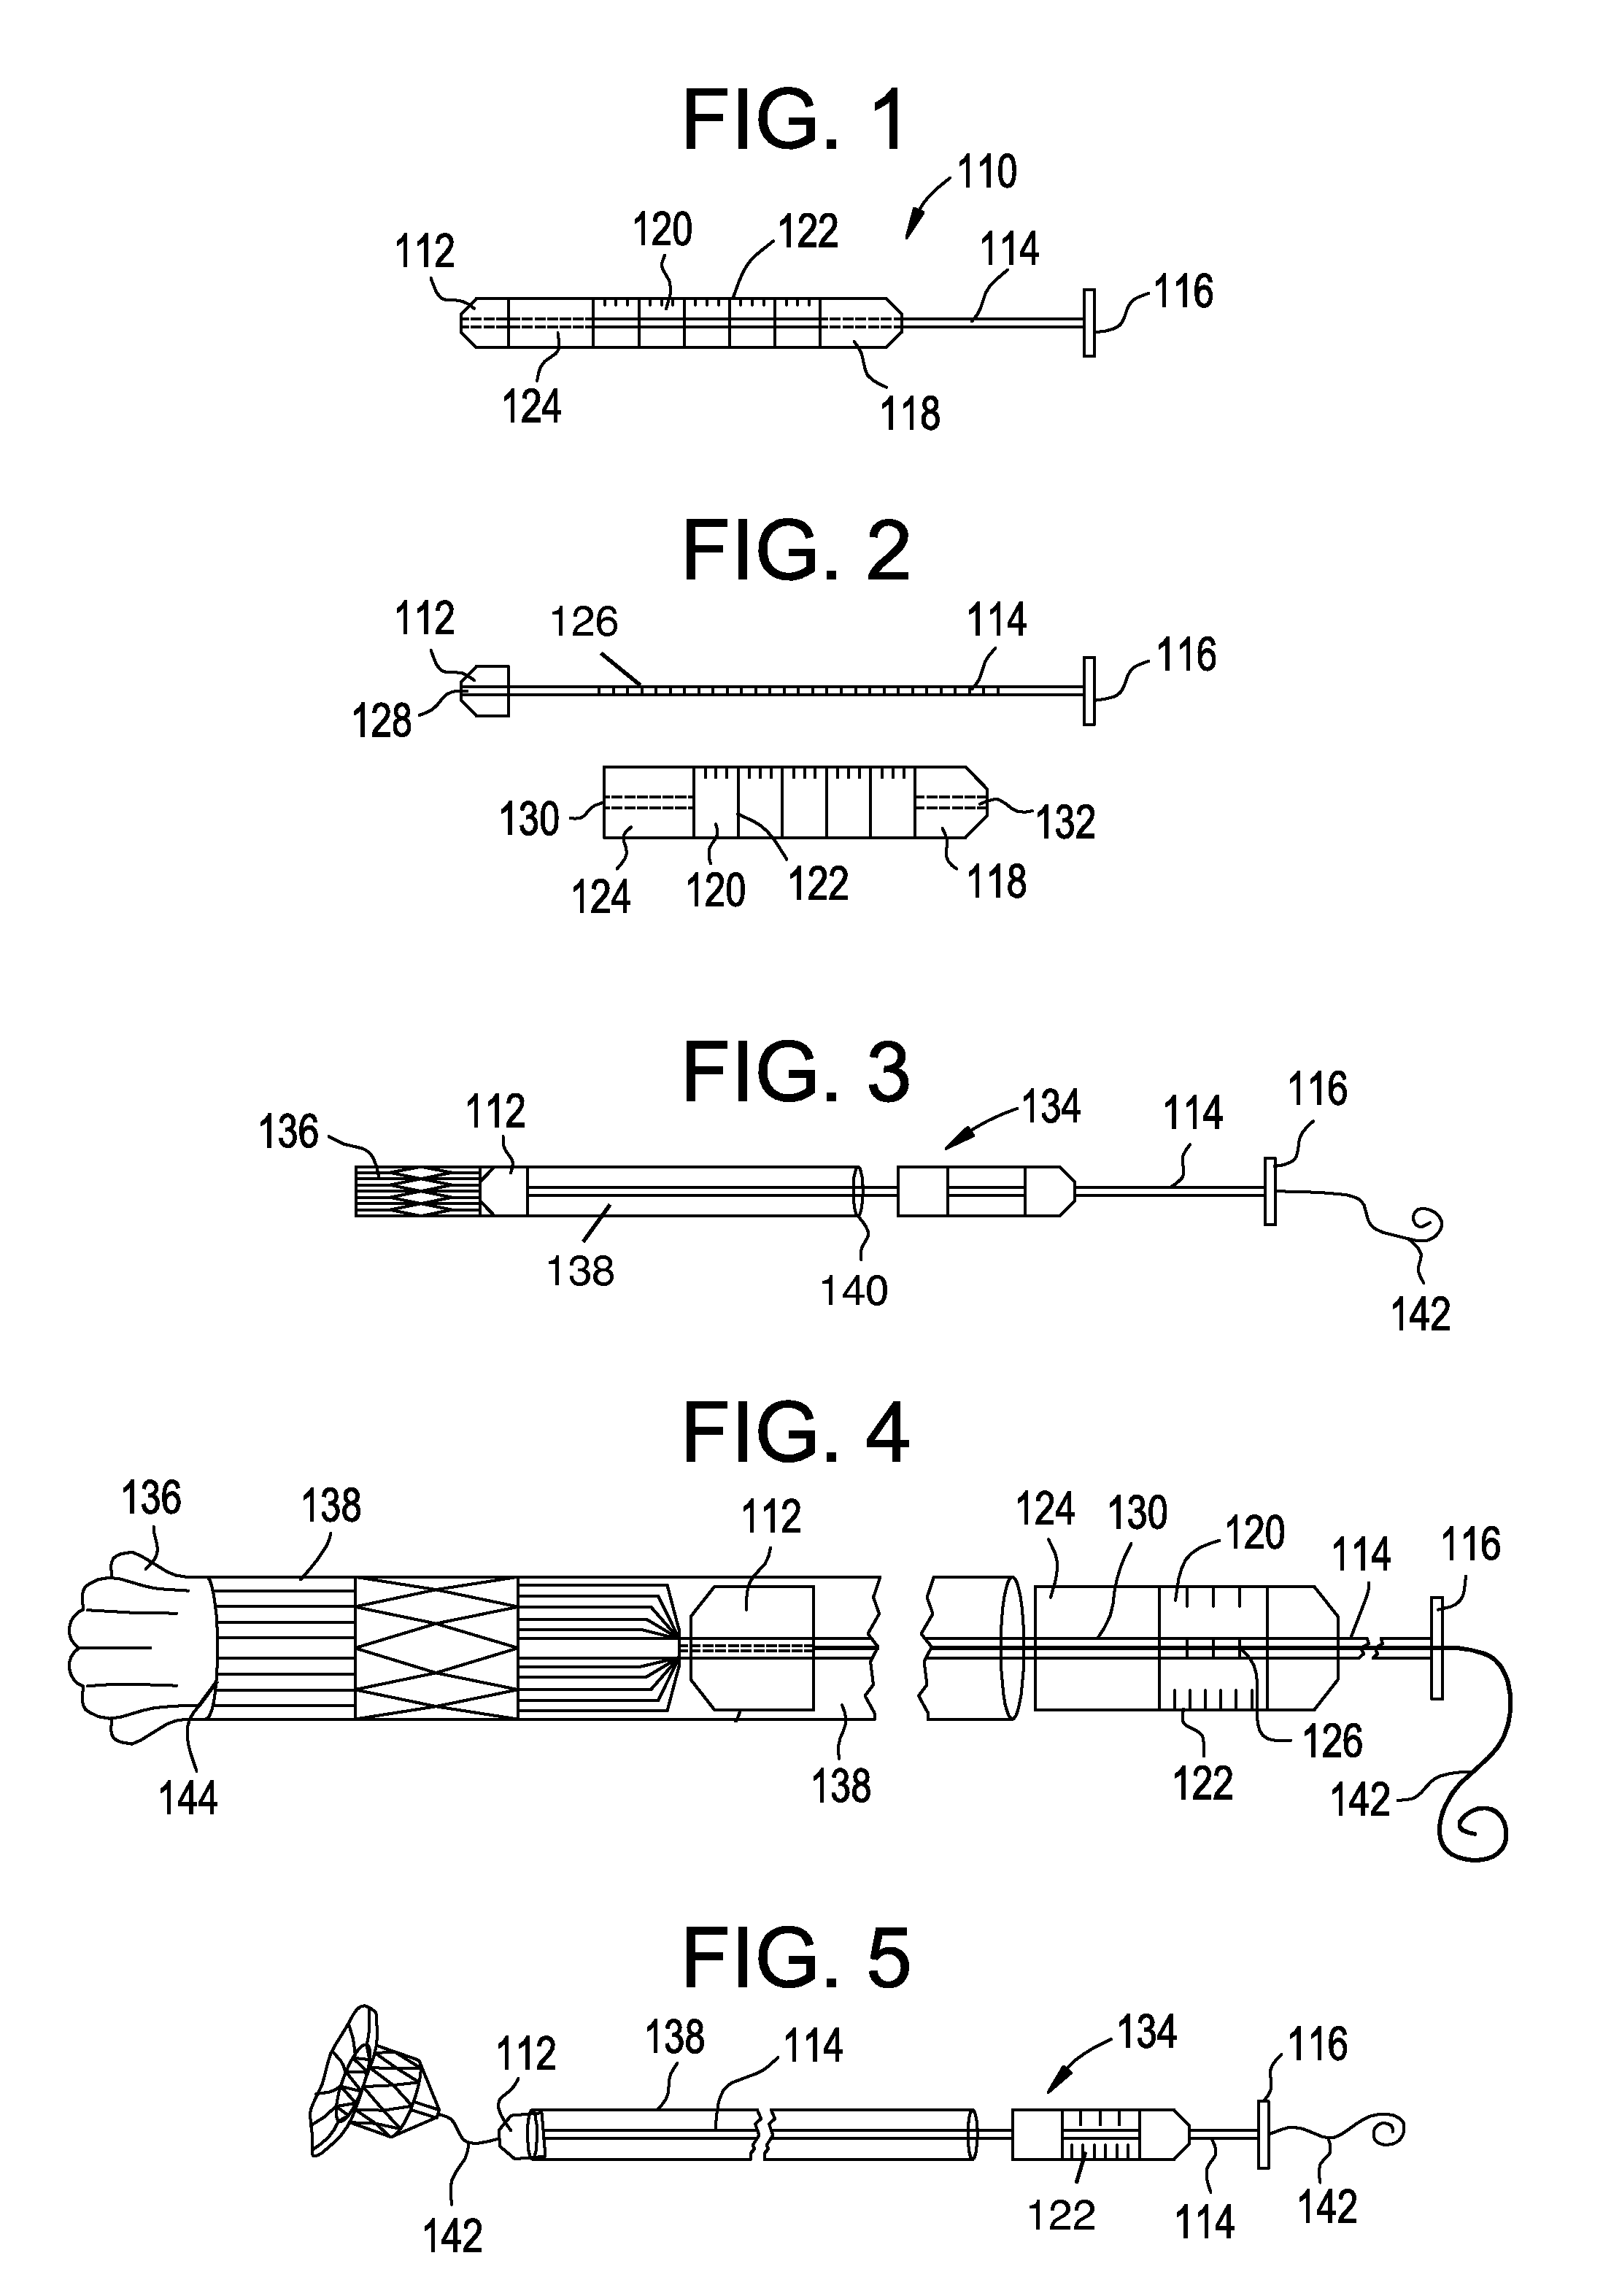 Positioning Tool for Transcatheter Valve Delivery